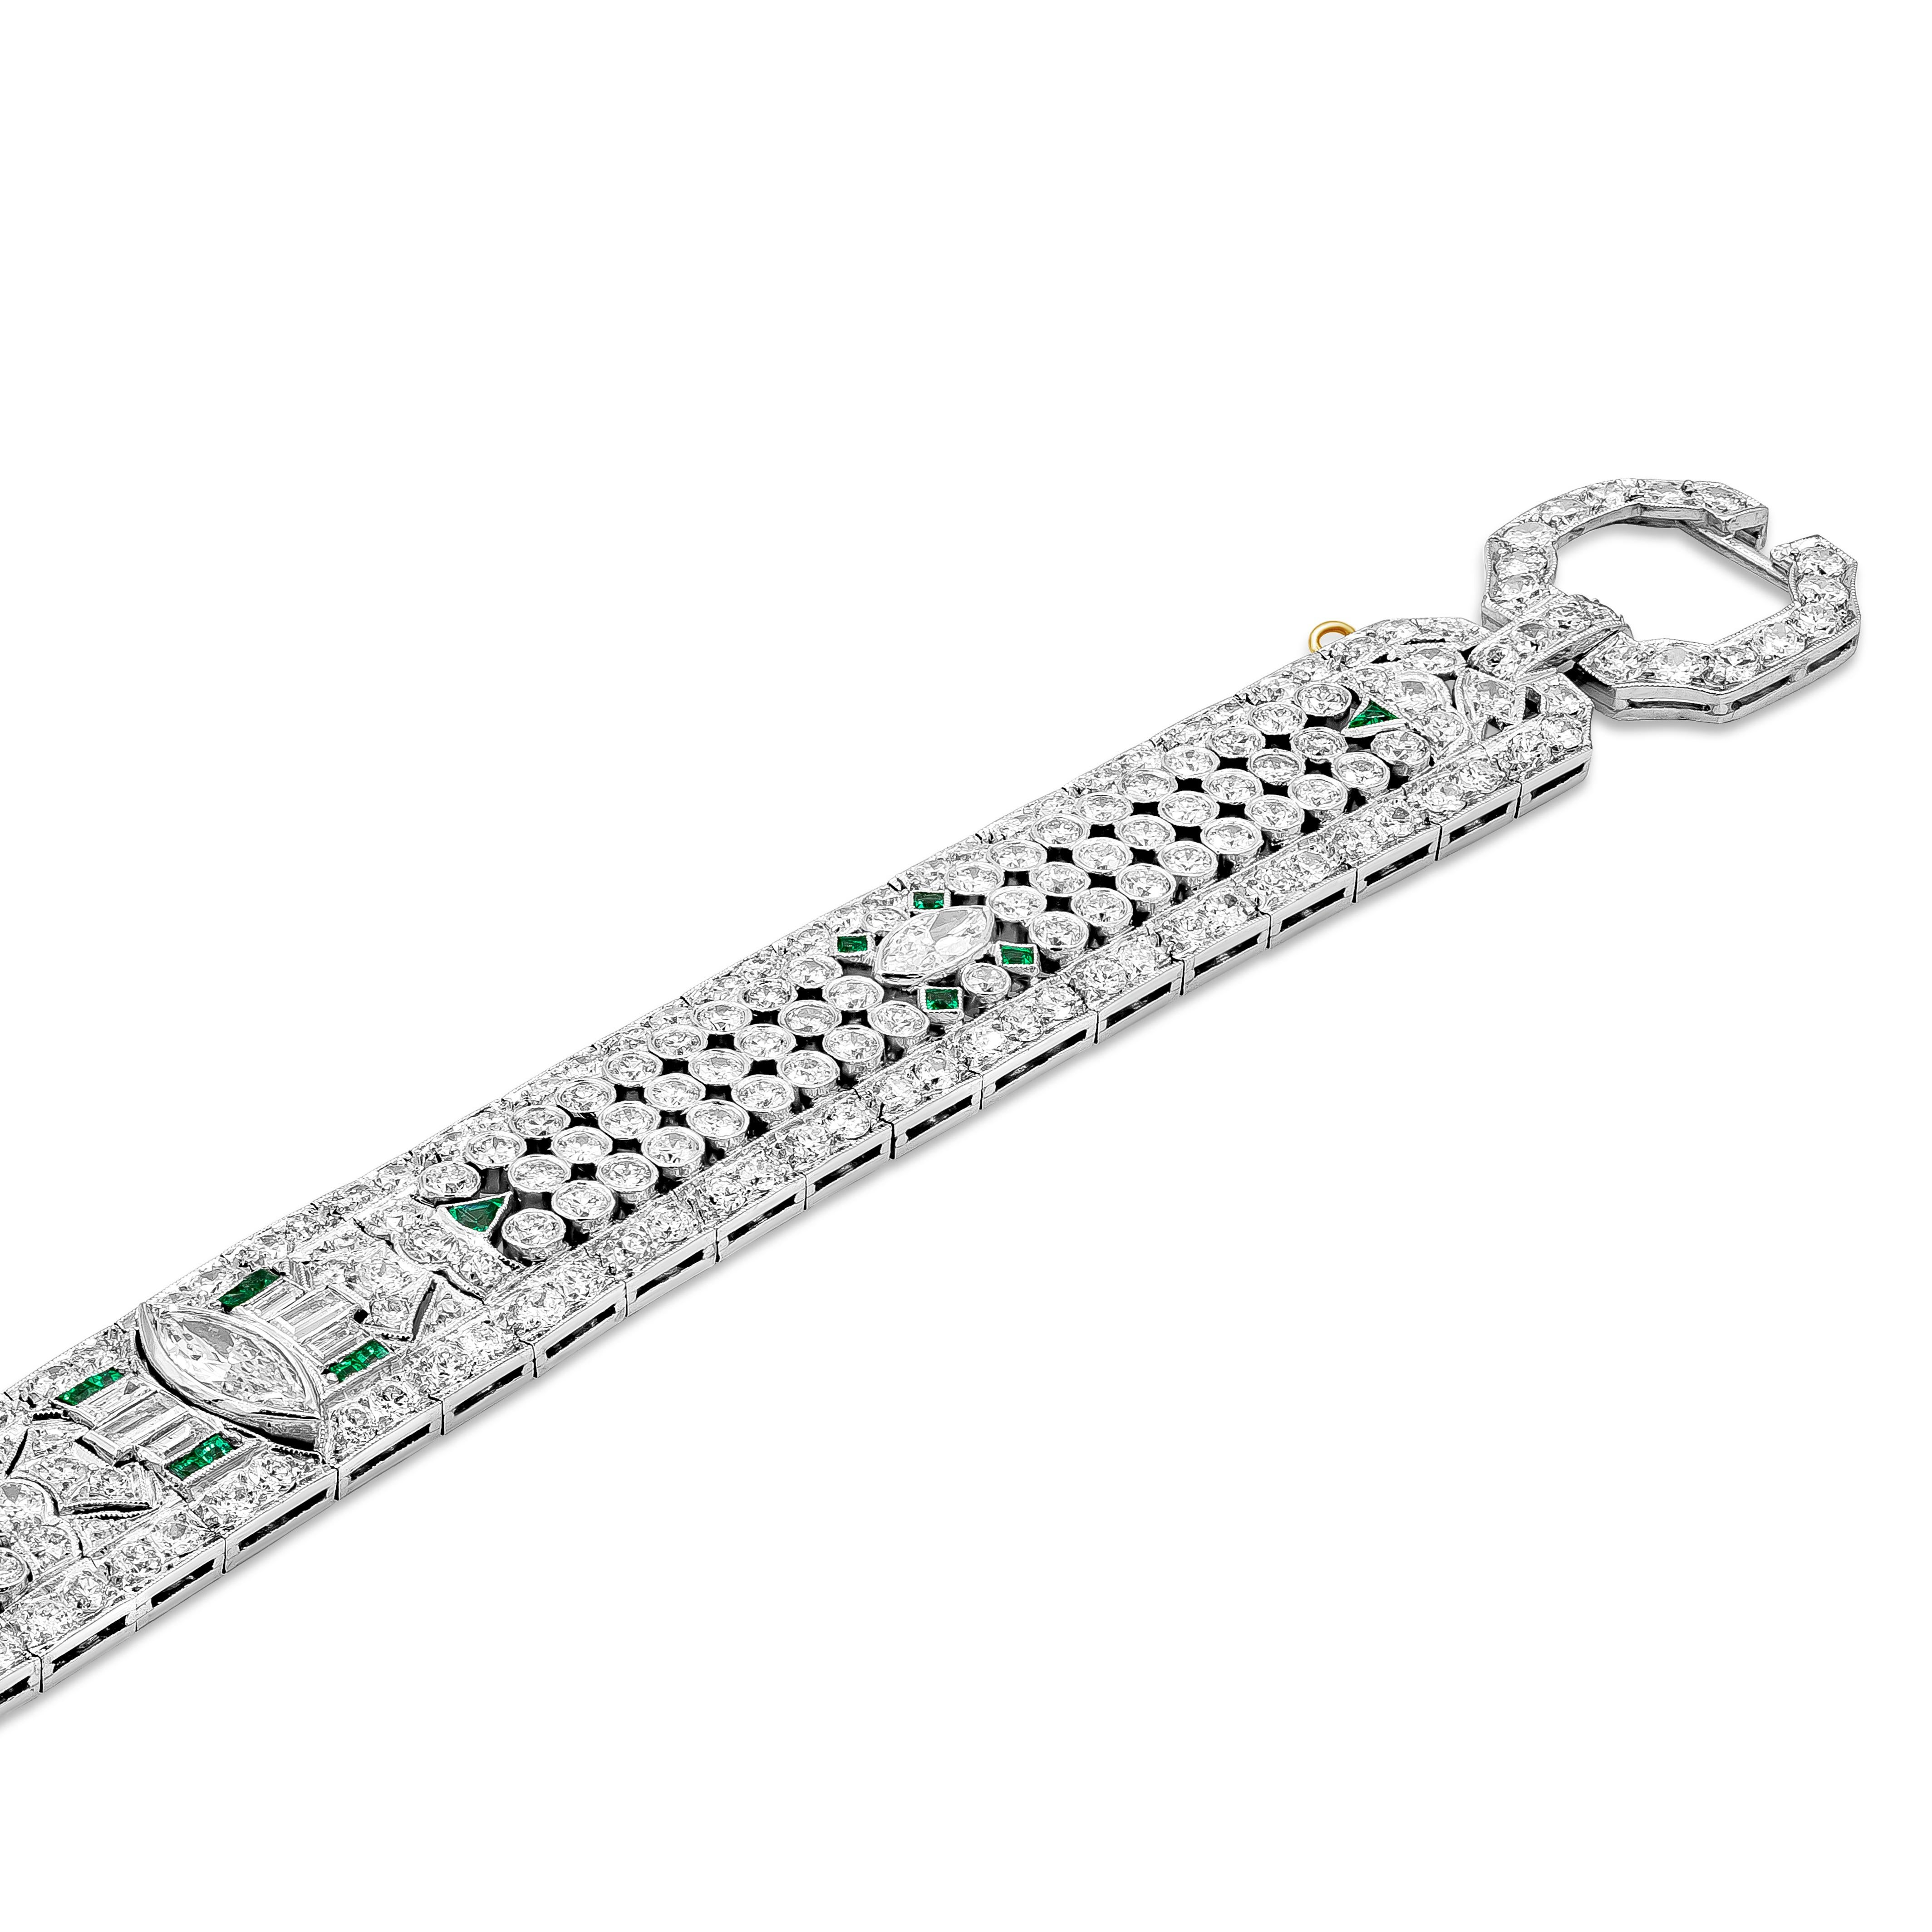 This striking bracelet features 15.50 carats of different cut diamonds in an elegant and intricate design. A full cut marquise diamond set at the center of the bracelet. Green Emeralds accent the bracelet as well. Made in platinum. A very well made